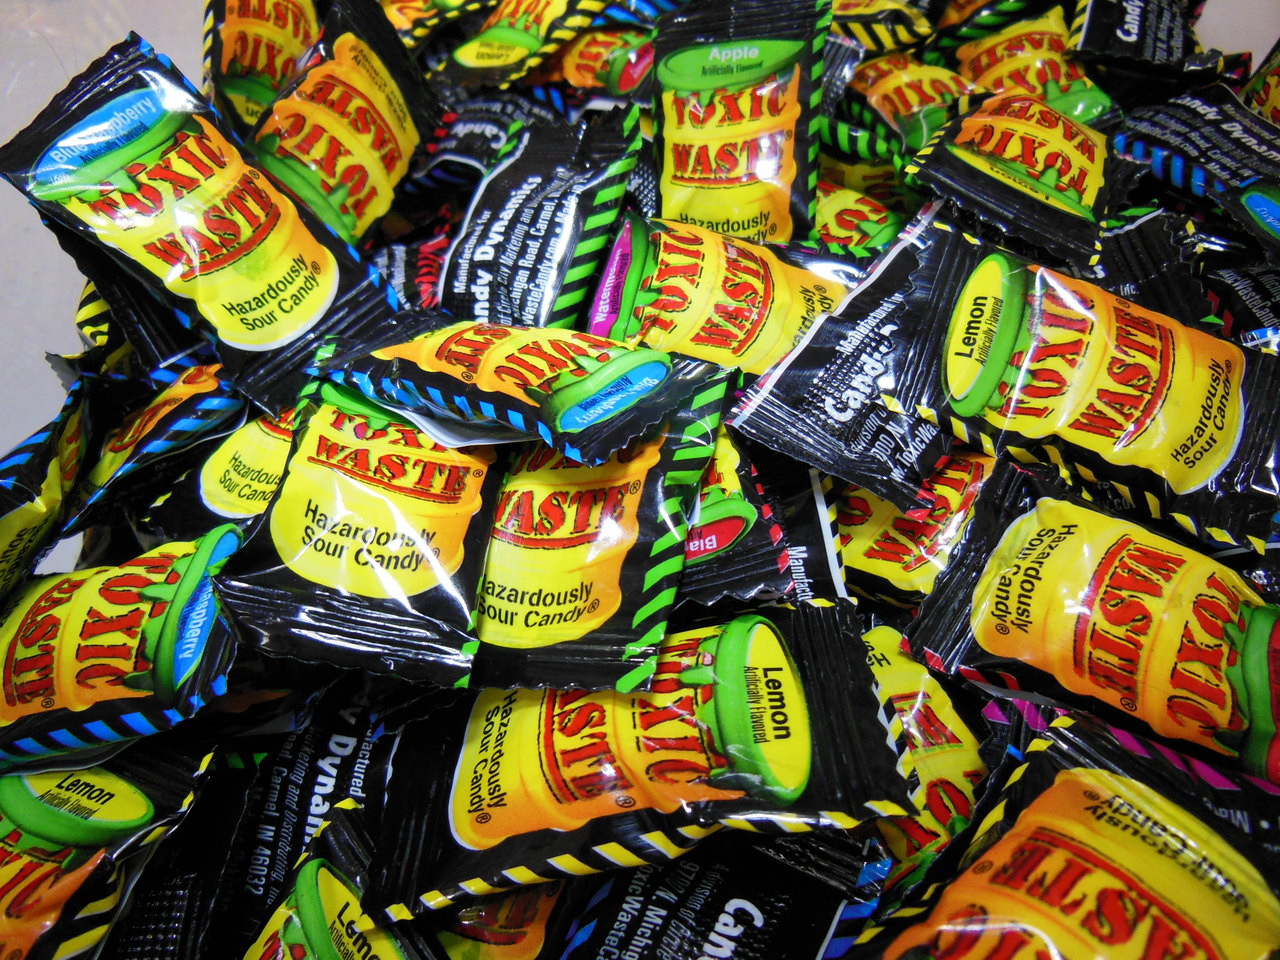 Toxic Waste Sour Candy 1 Lb Candy Dynamics - Boyd's Retro Candy Store Store